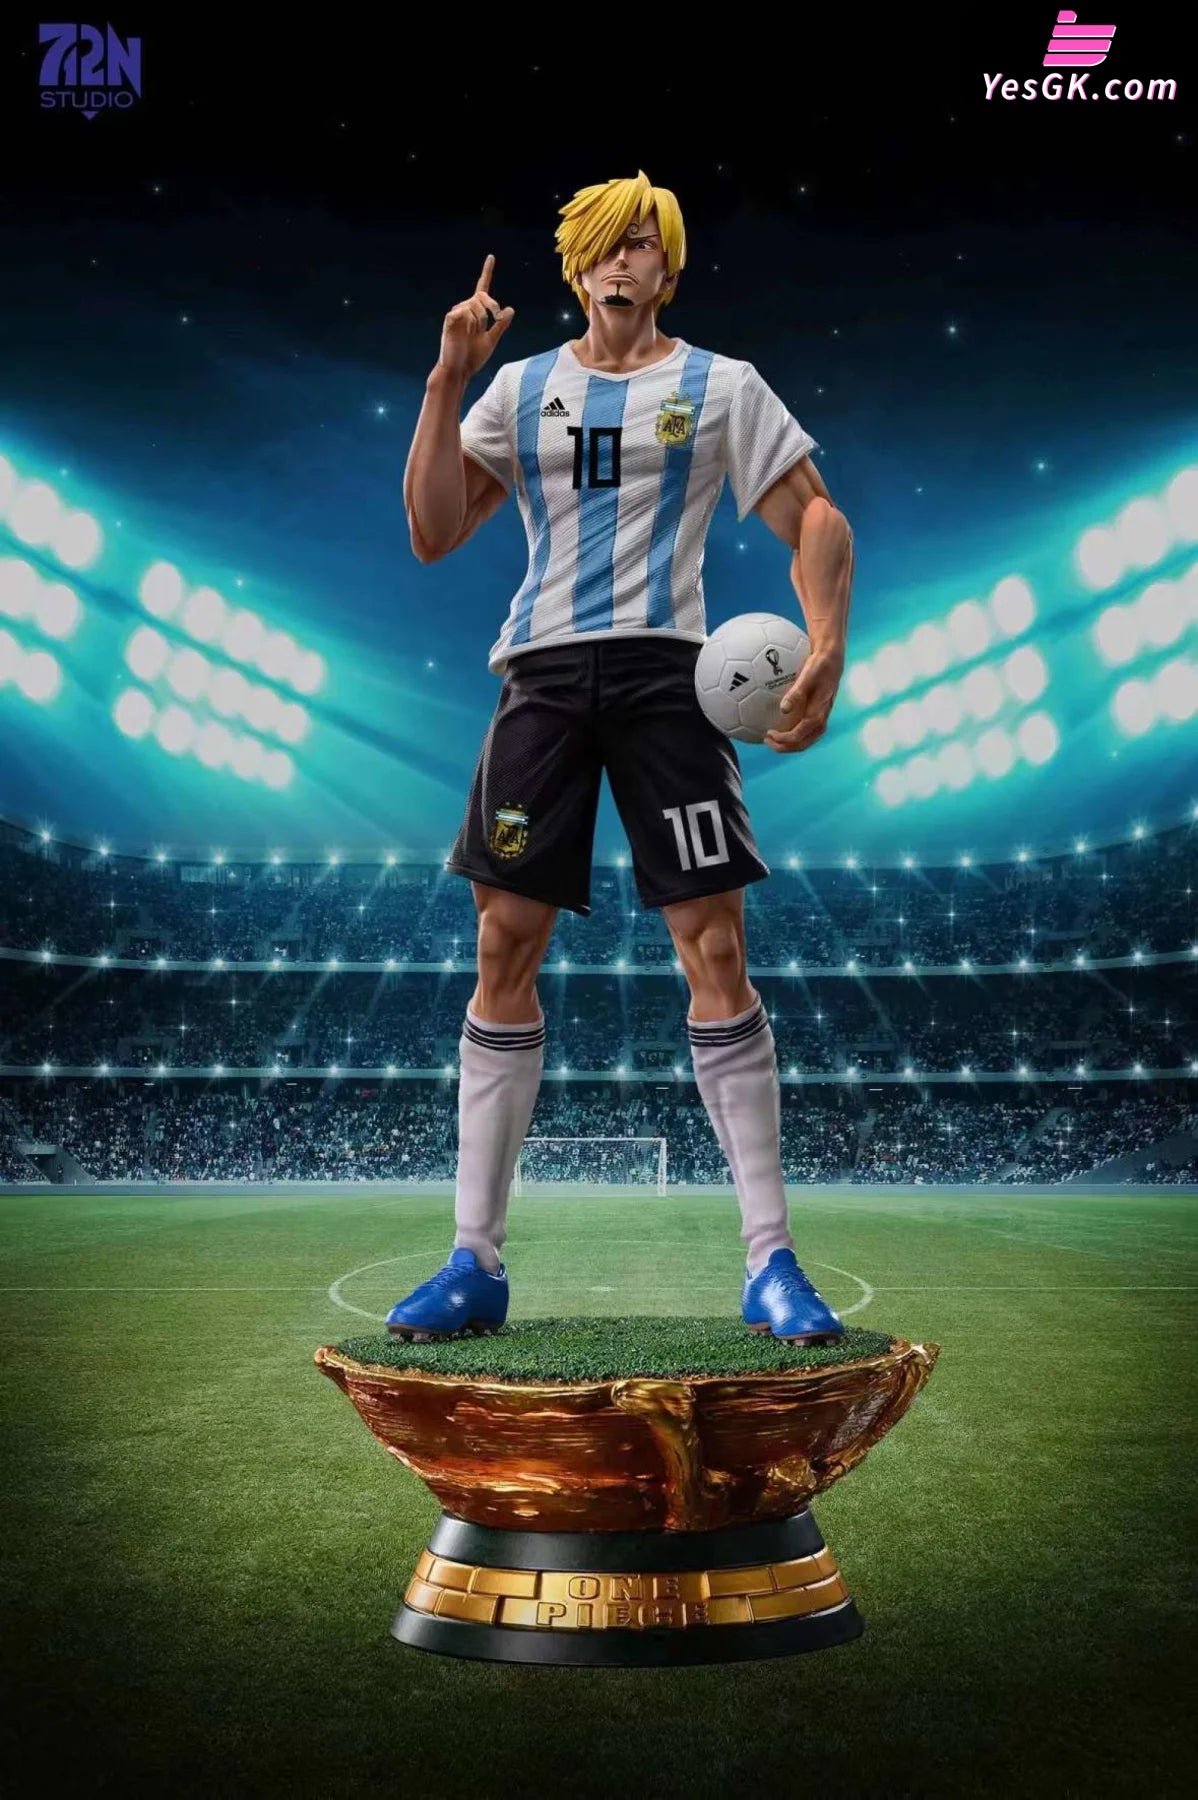 One Piece World Cup Sanji Cos Messi Statue - 712N Studio [In Stock]